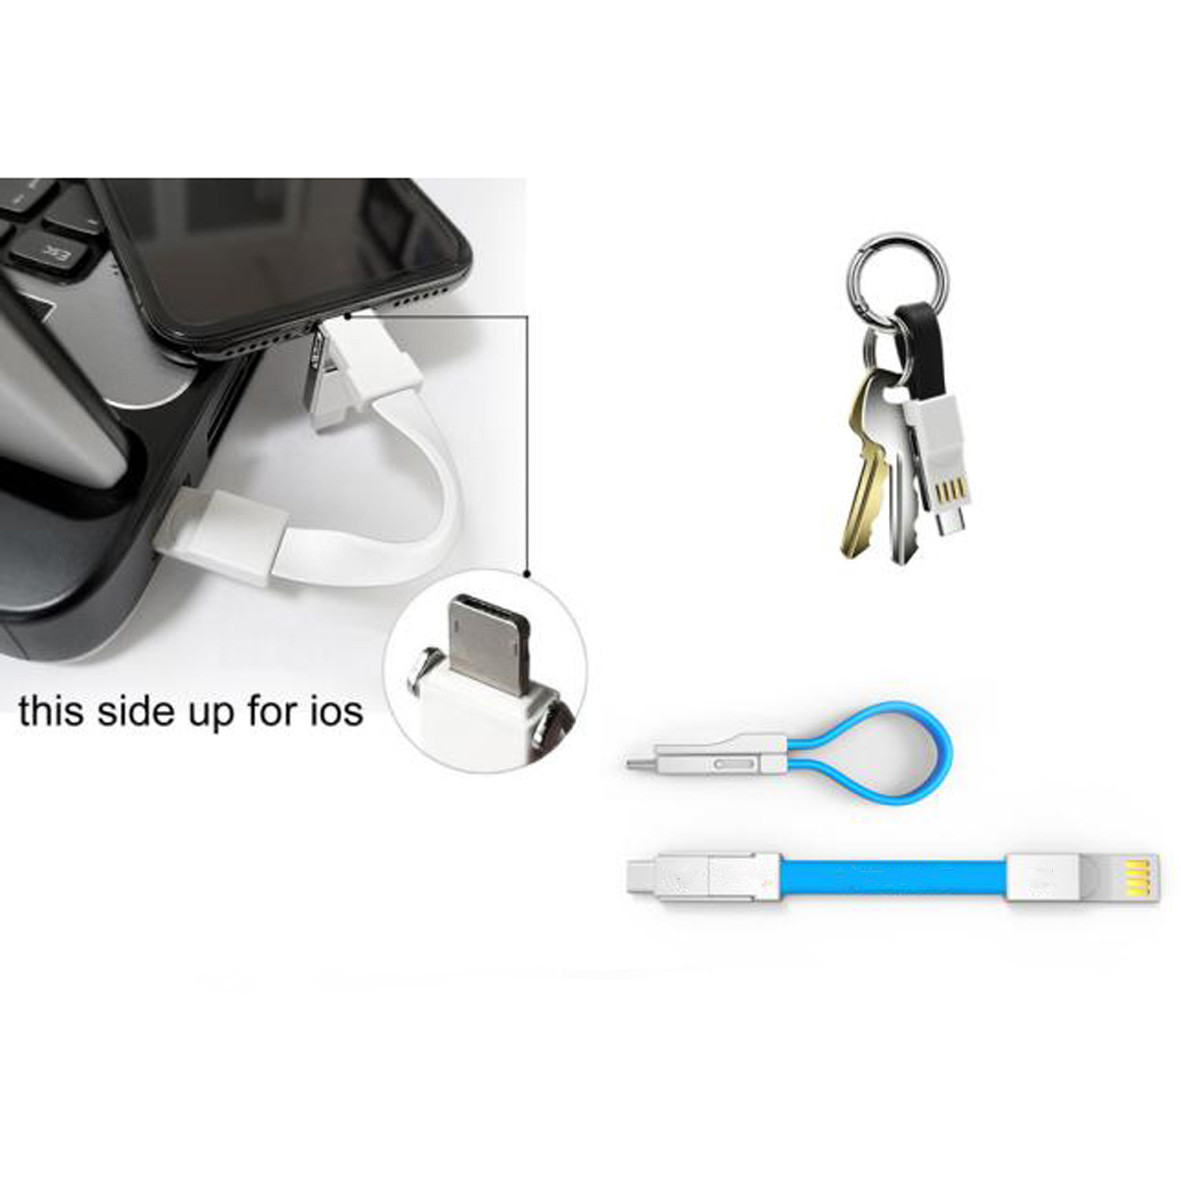 GL-ELY1114 3 in 1 Magnet Data Cable Keychain